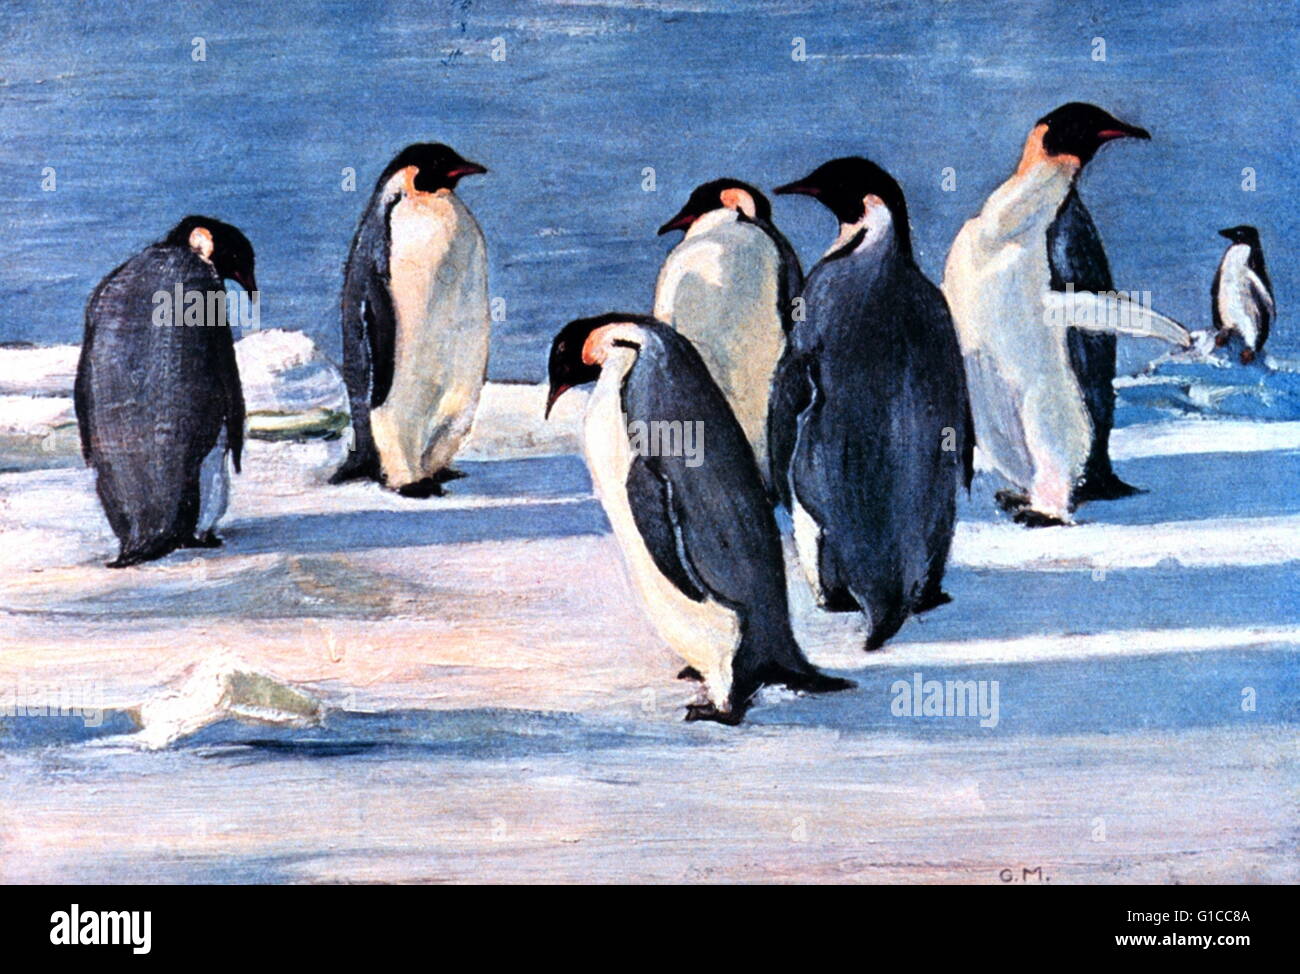 The Emperors' Conclave. In: 'The Heart of the Antarctic', Volume II, by E. H. Shackleton, 1909 Stock Photo